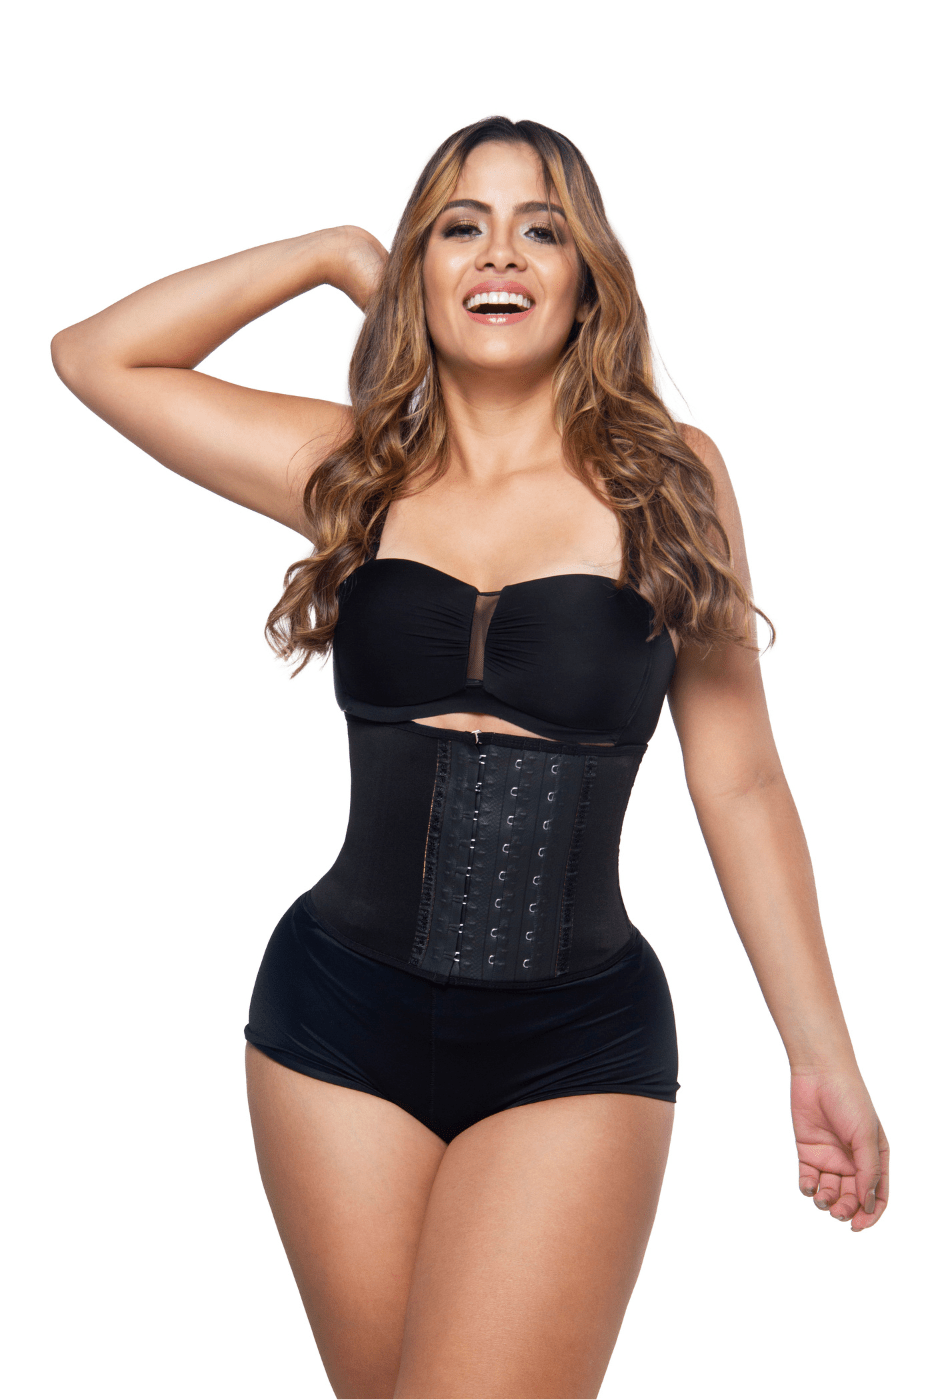 Keeccty Single Breasted Corset Short Extra Slim Leg High Rise Body